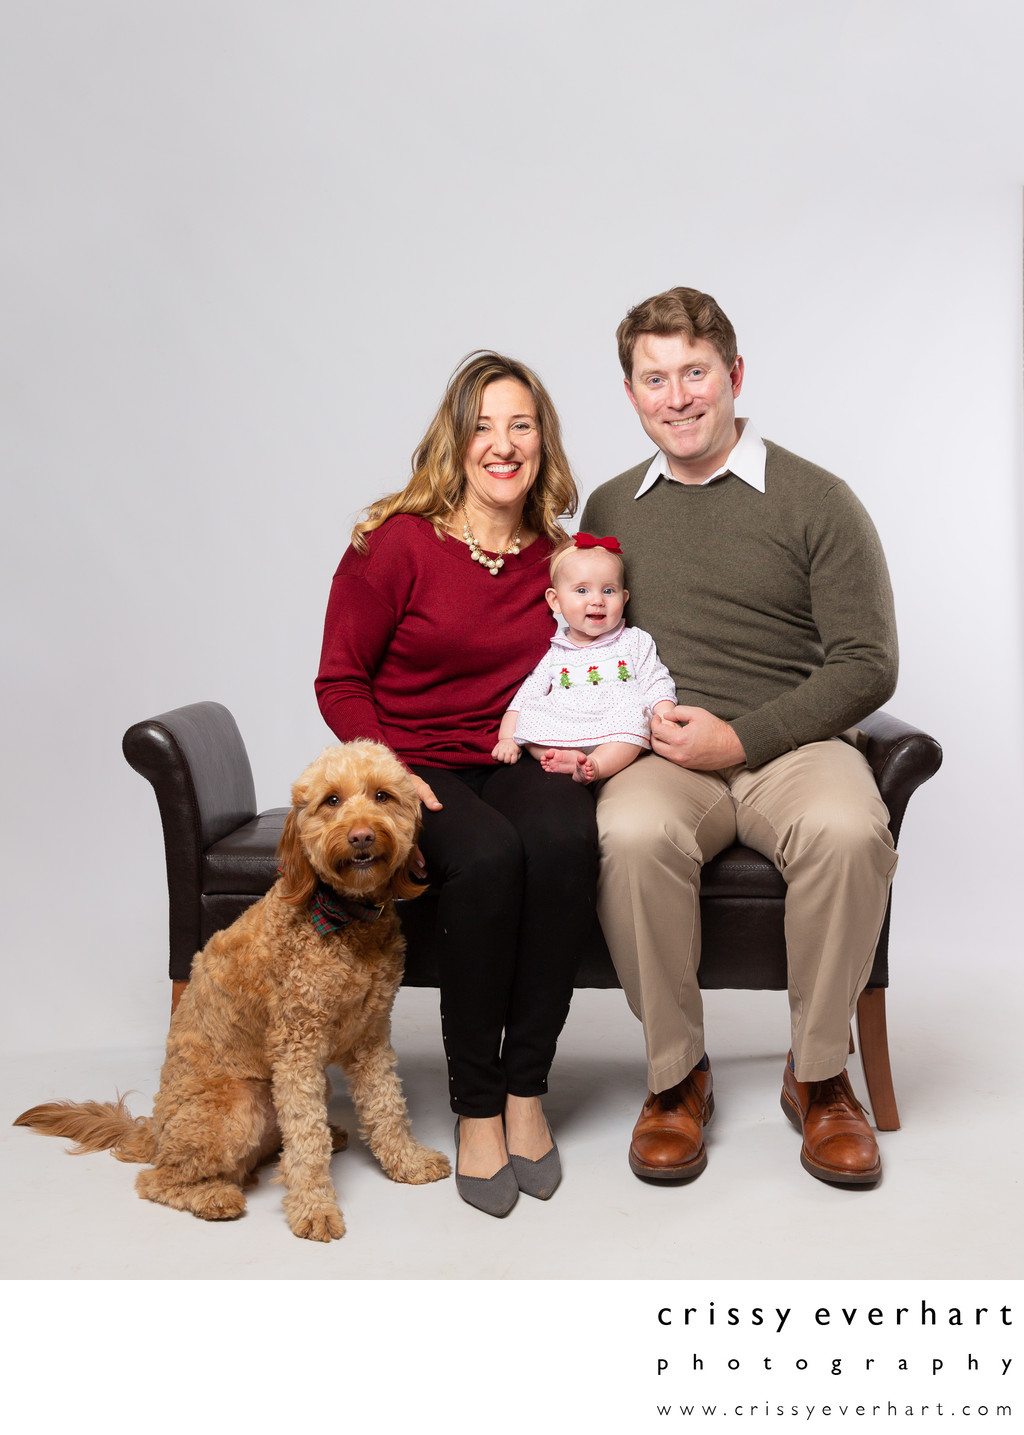 Family Photos with Furry Friends